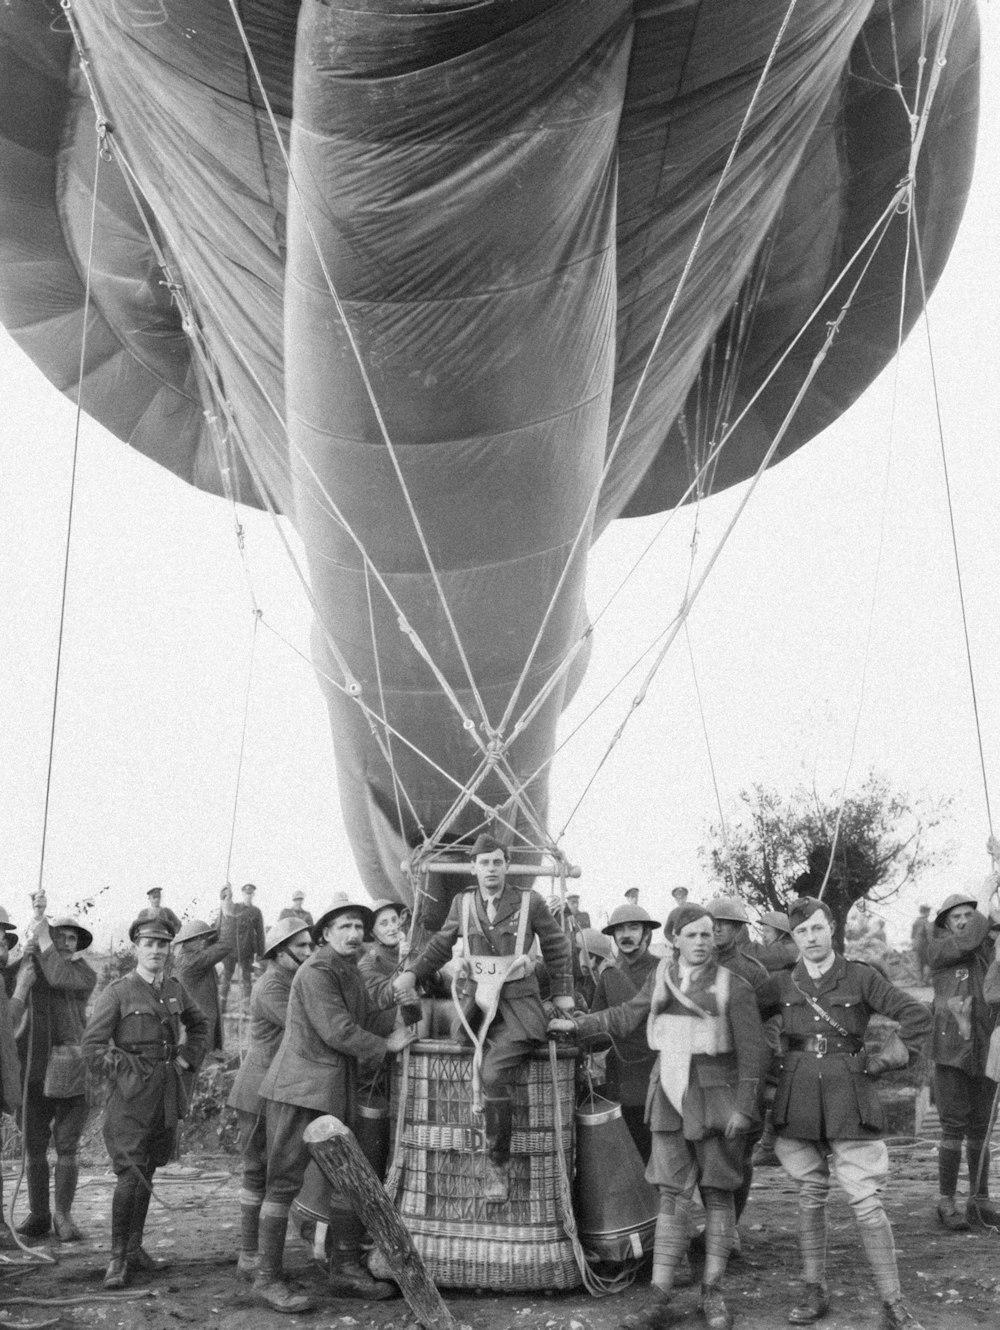 a group of people standing around a large balloon